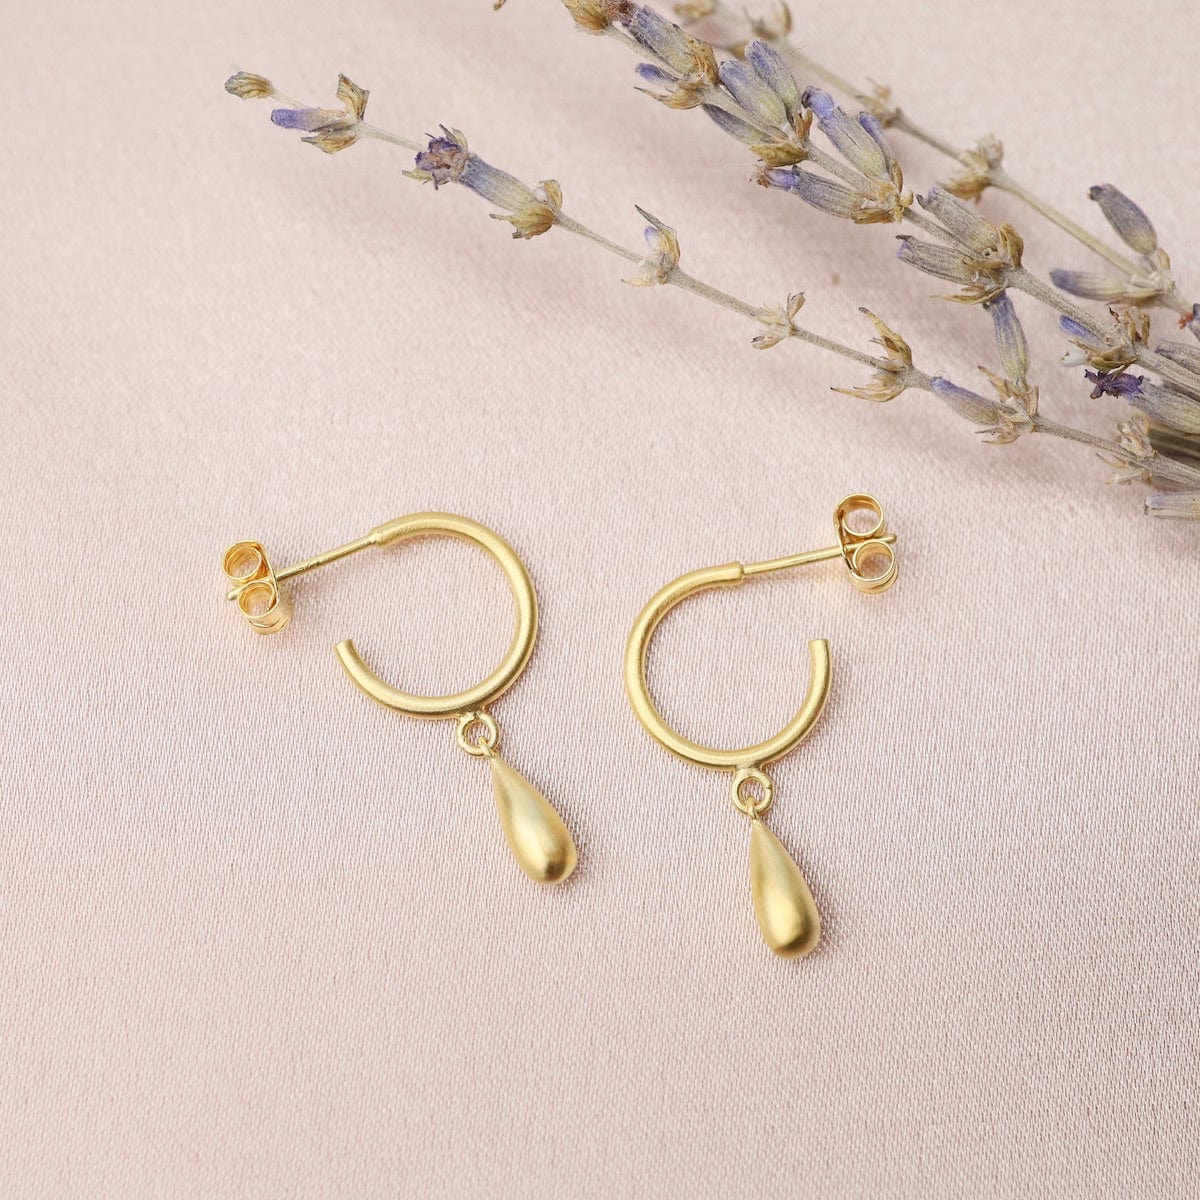 EAR-VRM Small Hoops with Hanging Drop - Brushed Gold Vermeil